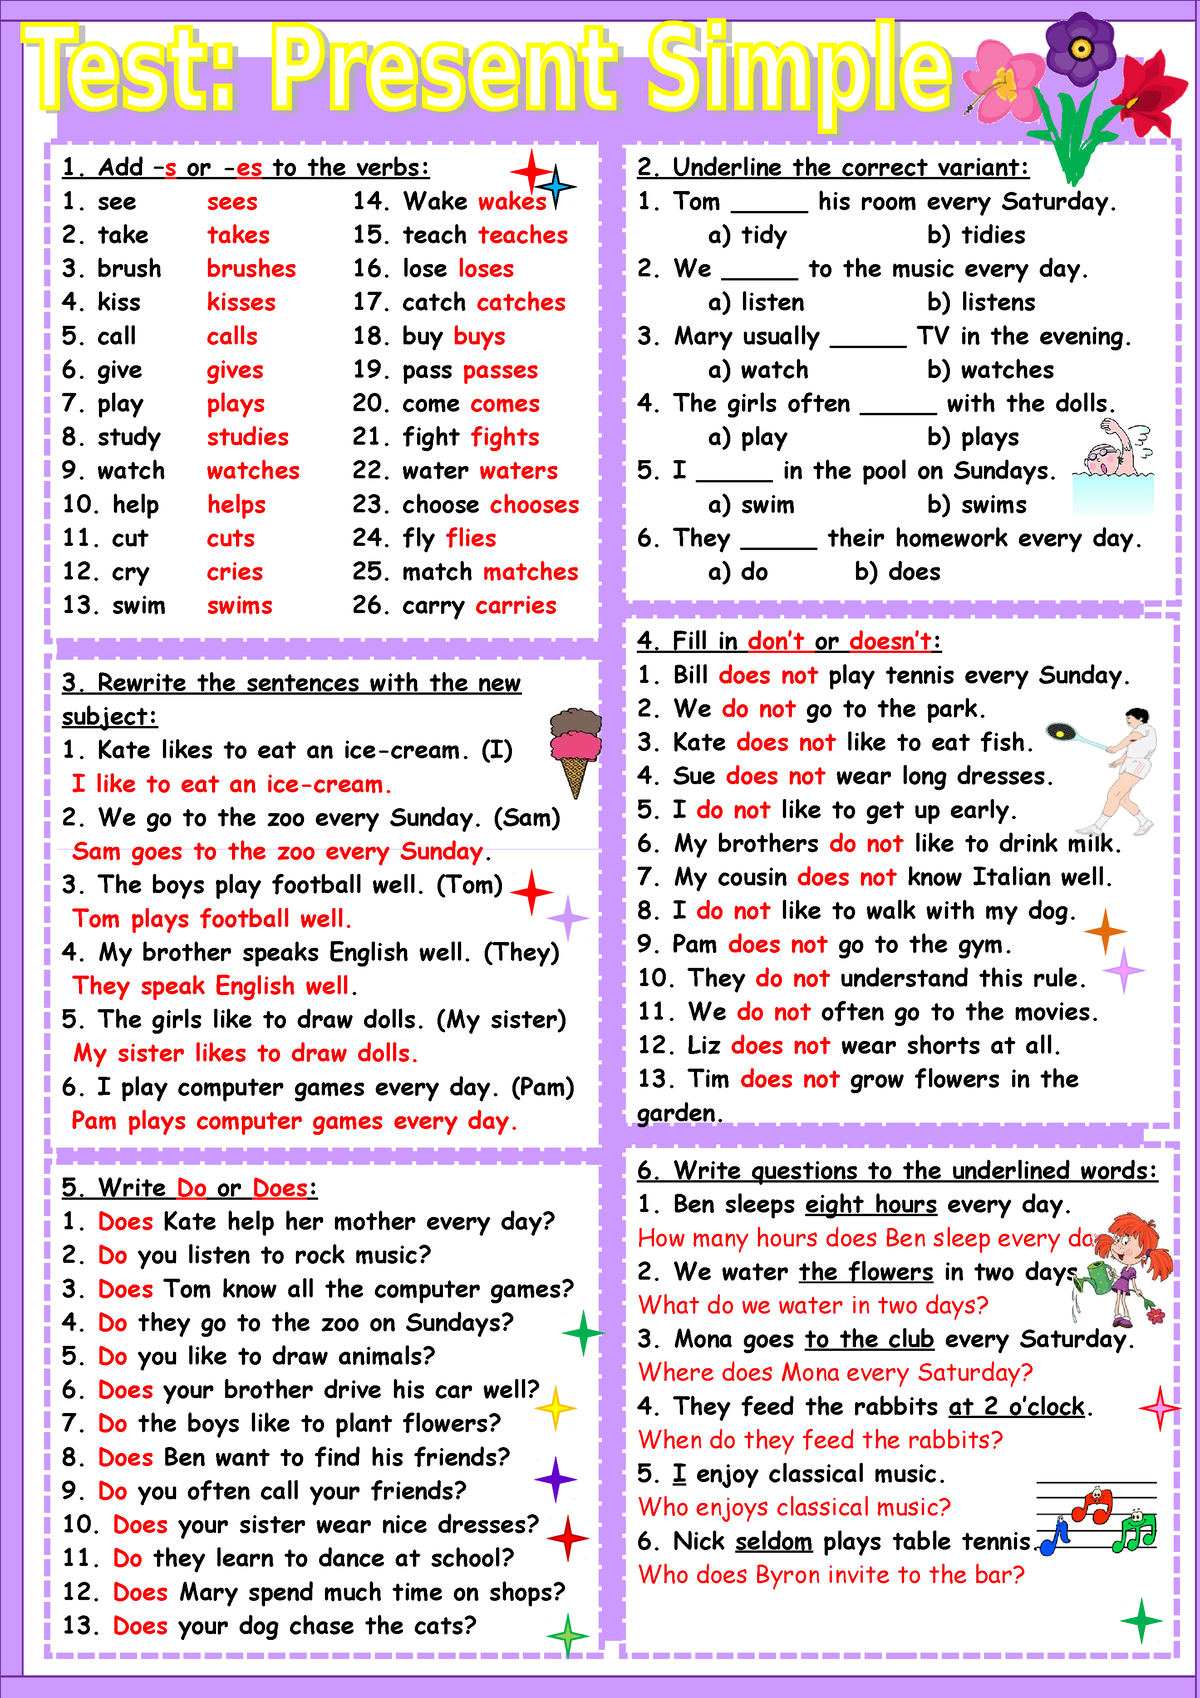 worksheet-present-simple-1-and-2-add-s-or-es-to-the-verbs-see-sees